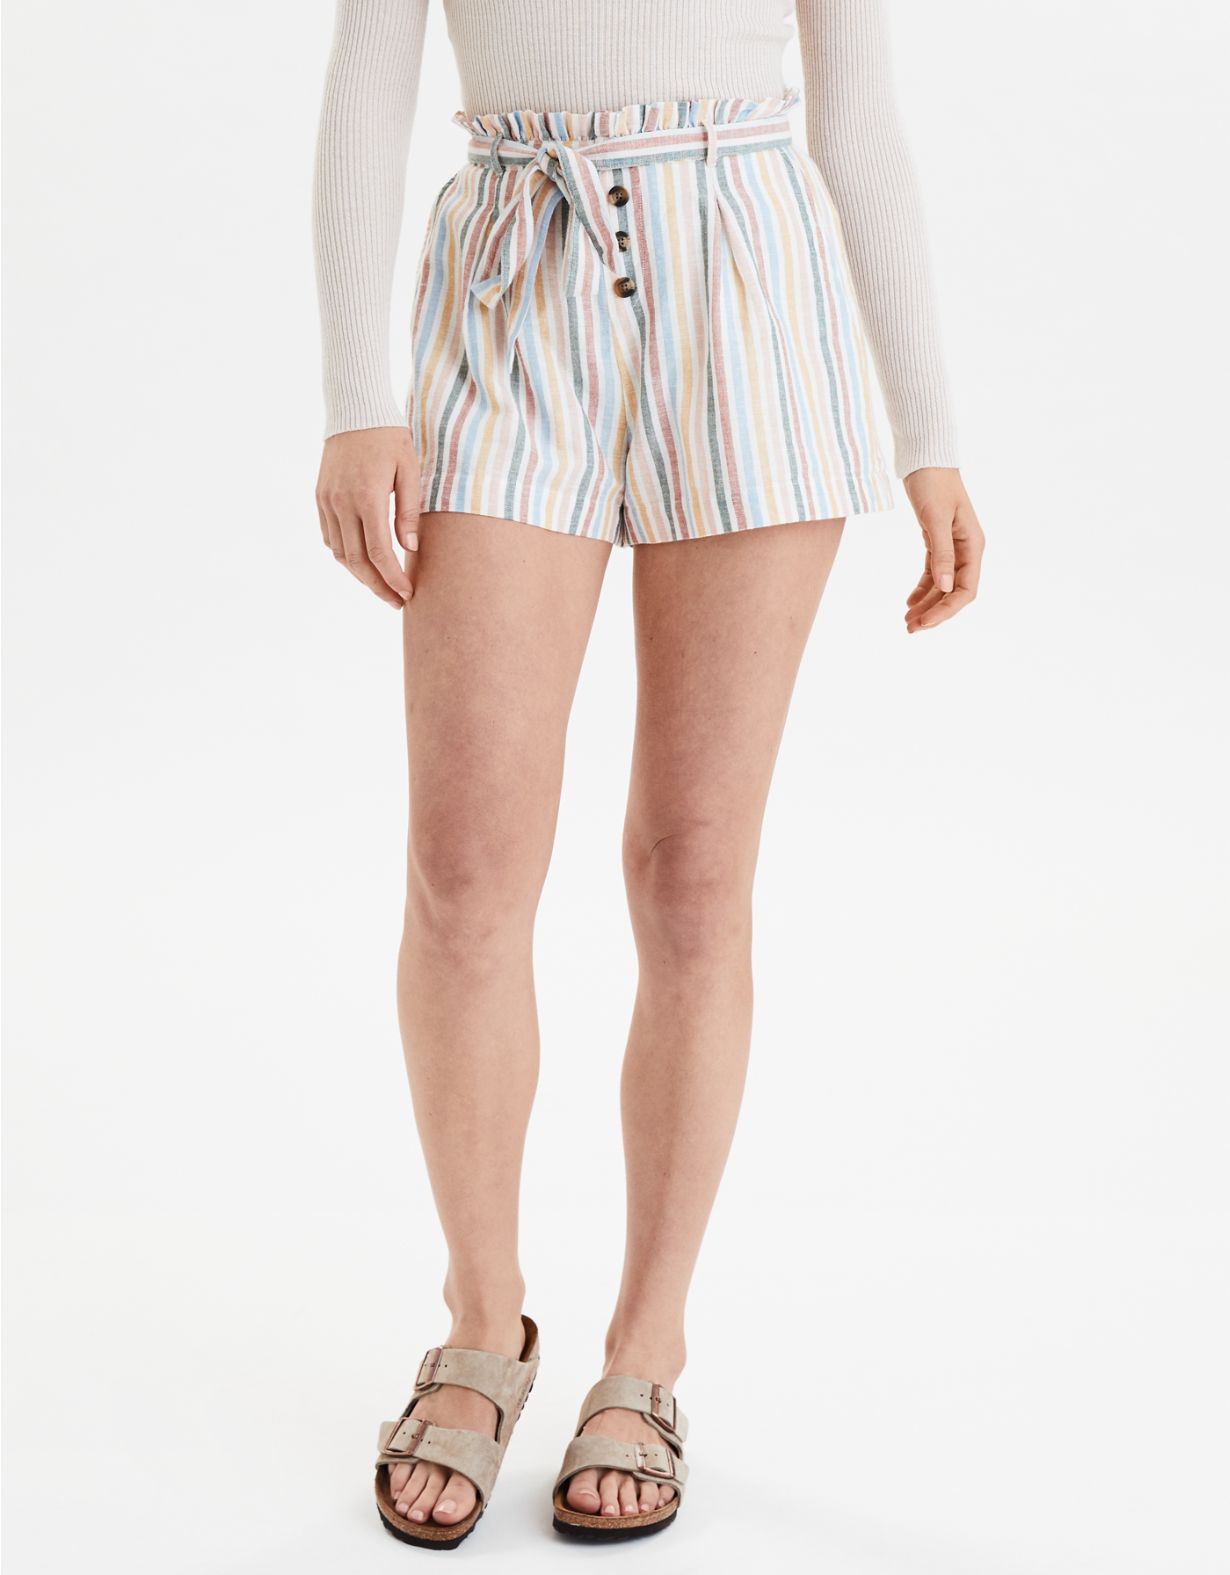 AE High-Waisted Striped Button Front Paperbag Short